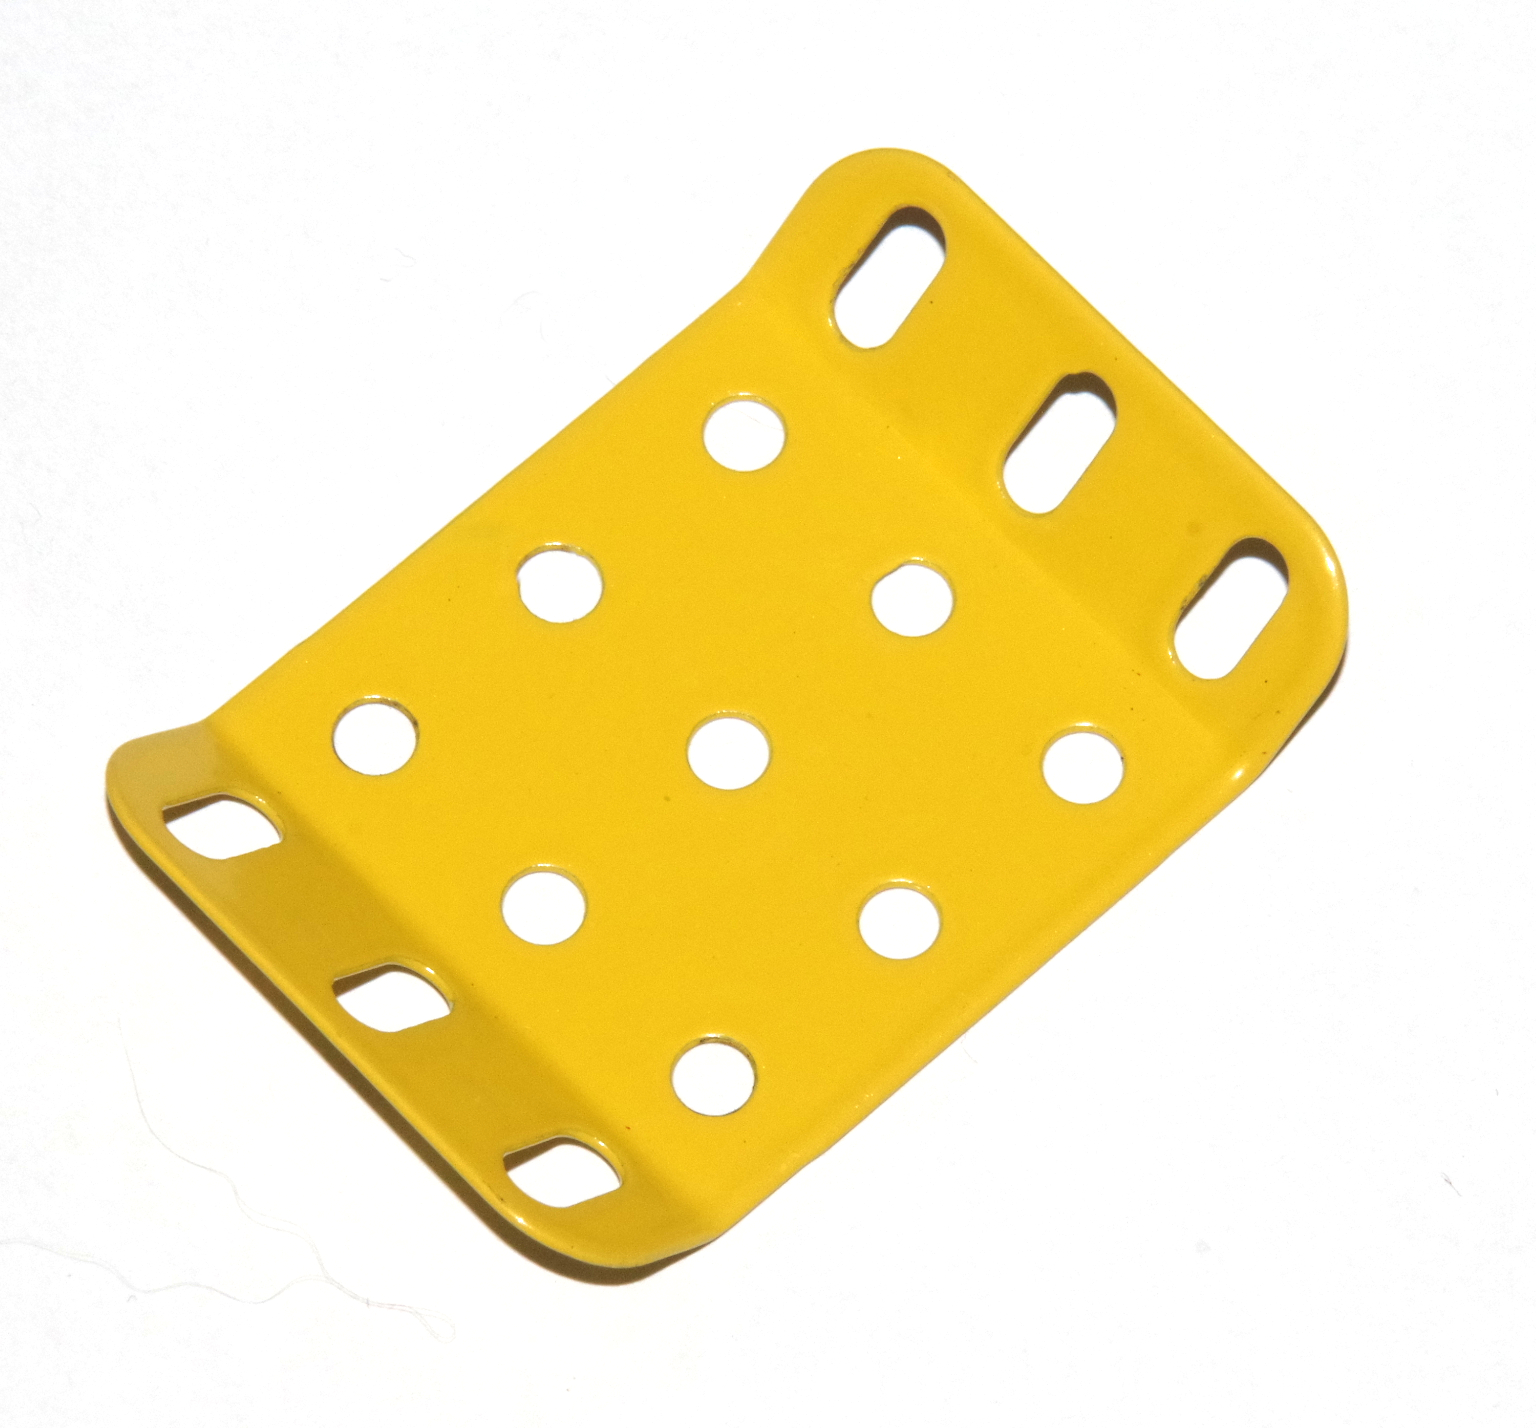 51h Double Obtuse Flanged Plate 5x3 French Yellow Original